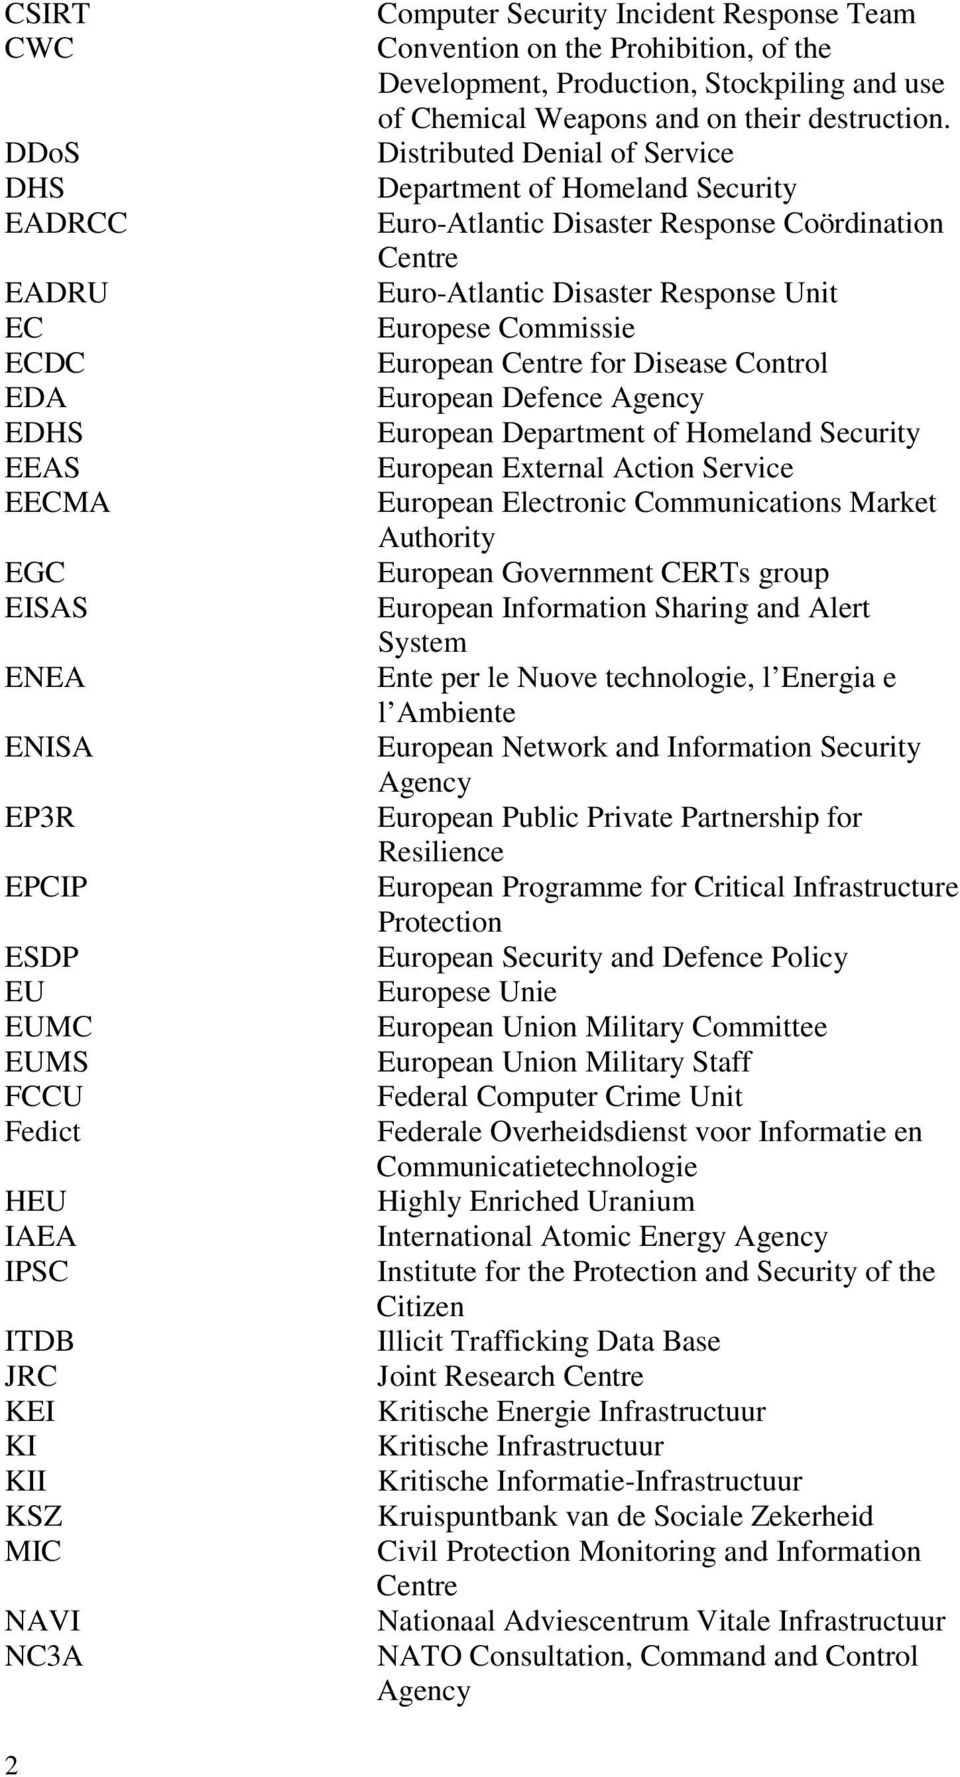 Distributed Denial of Service Department of Homeland Security Euro-Atlantic Disaster Response Coördination Centre Euro-Atlantic Disaster Response Unit Europese Commissie European Centre for Disease